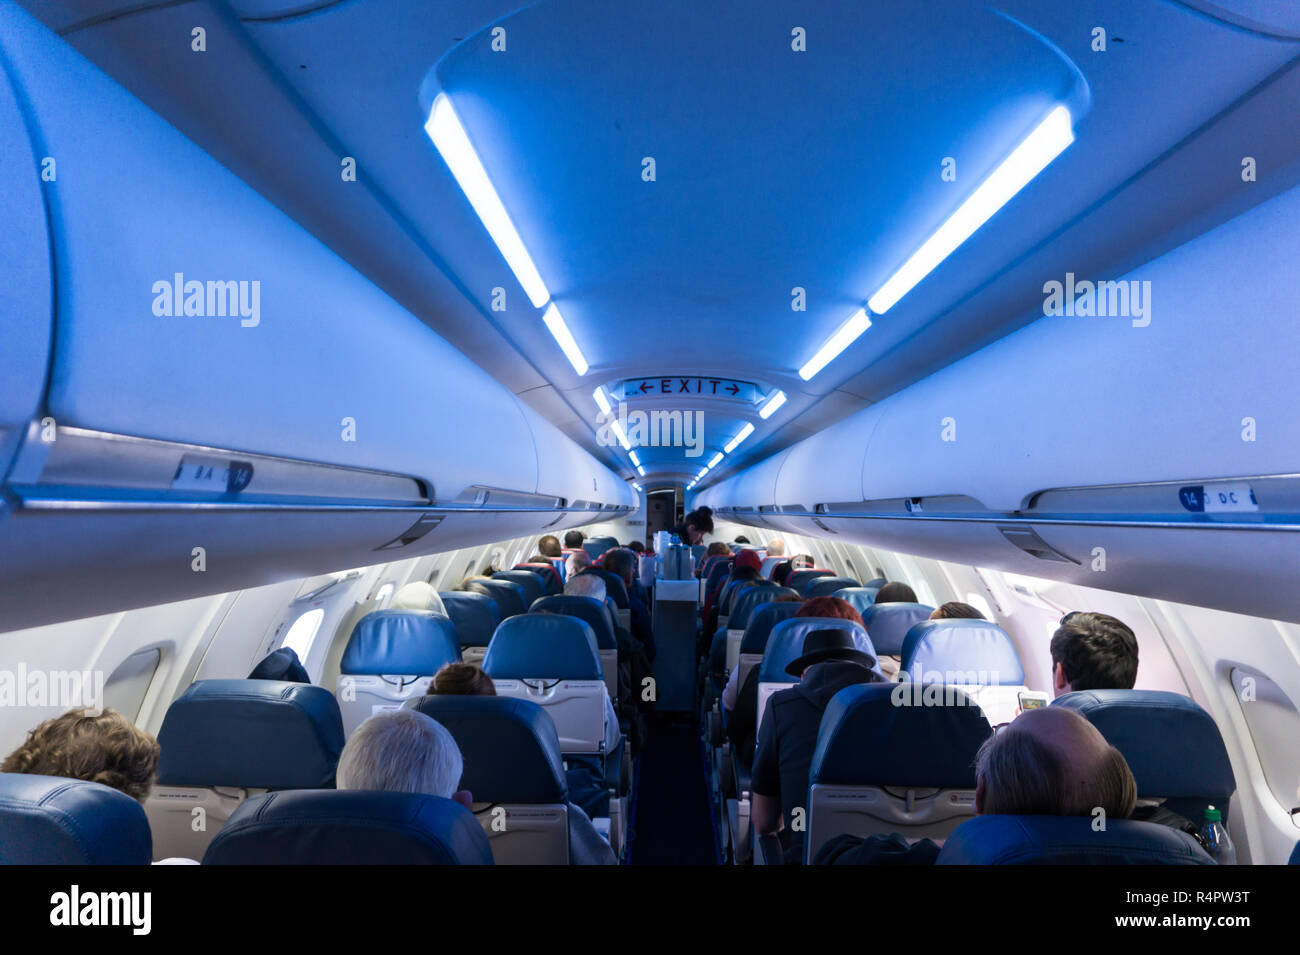 Interior of airplane full of seated passengers while in flight with EXIT sign clearly visible Stock Photo